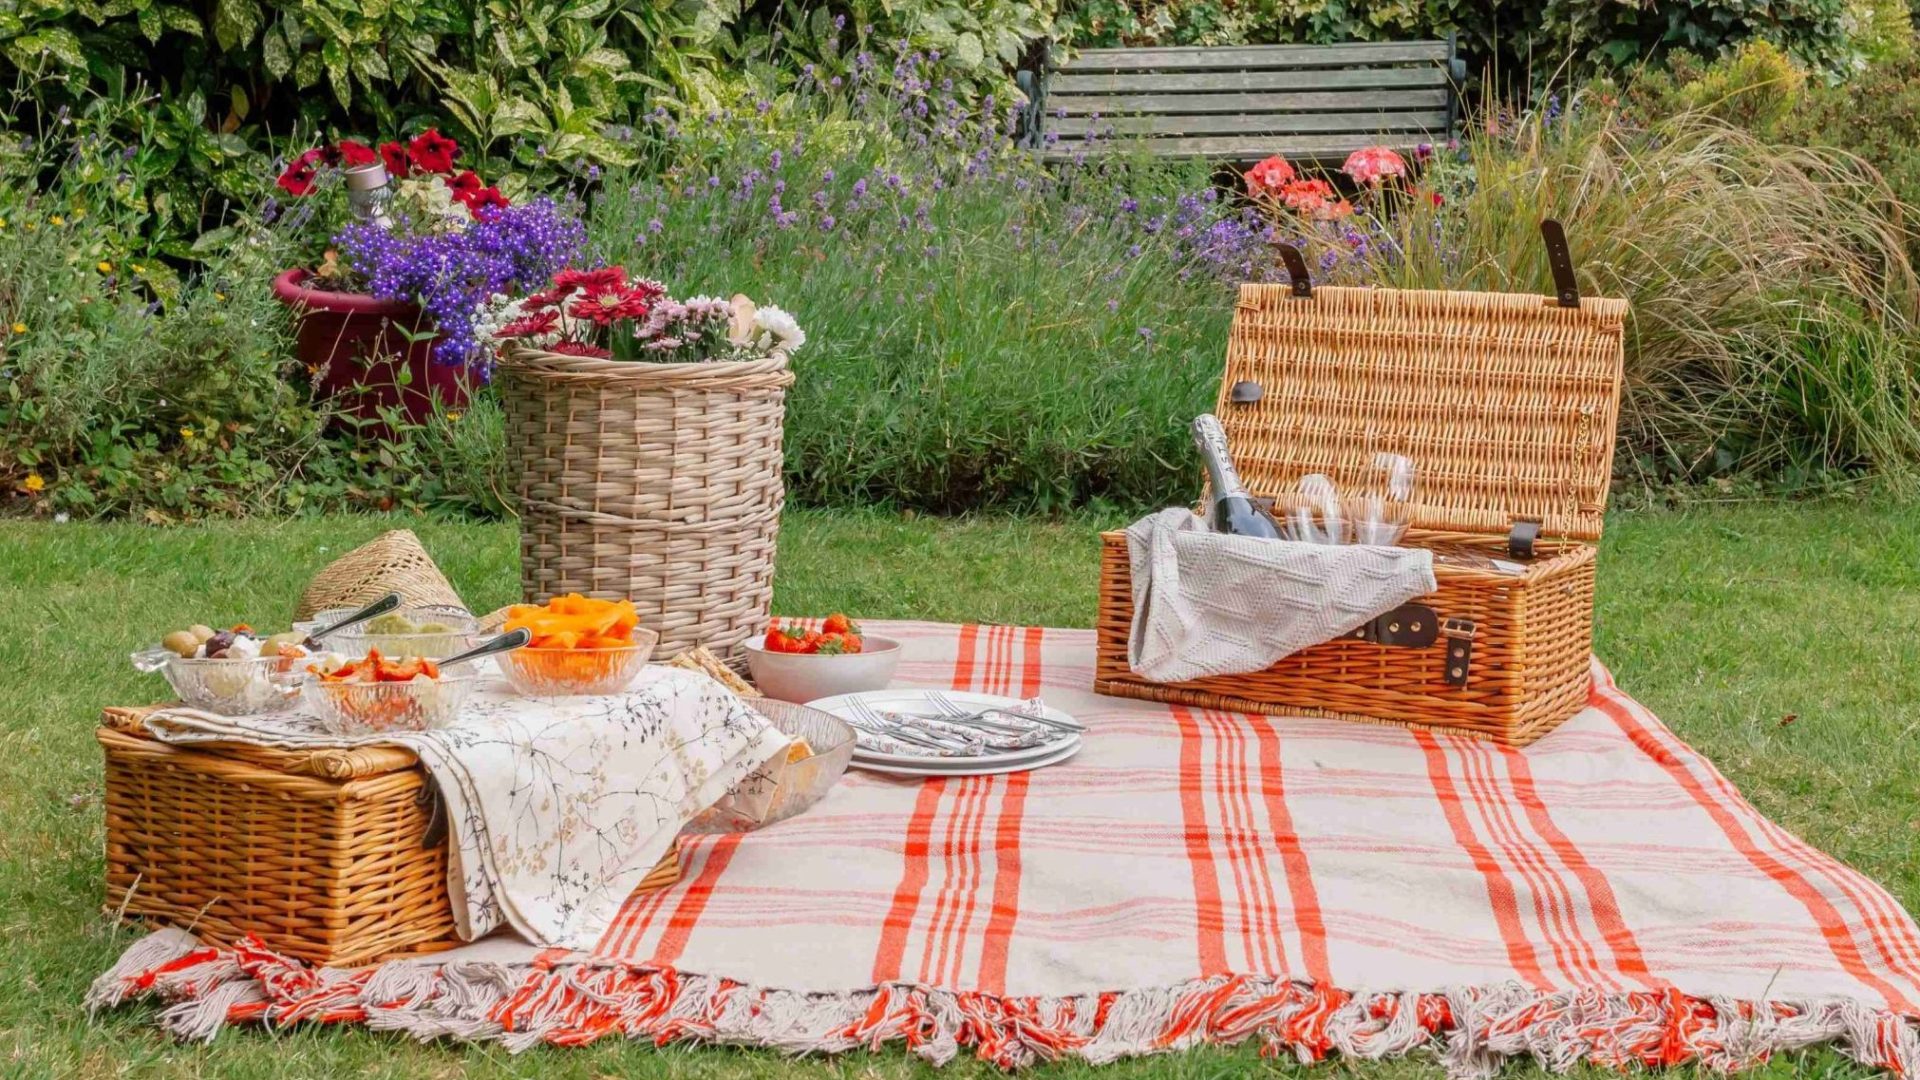 Picnic in the garden at The Lawns, A Dorset Holiday Cottage in Charlton Marhsall near Blandford